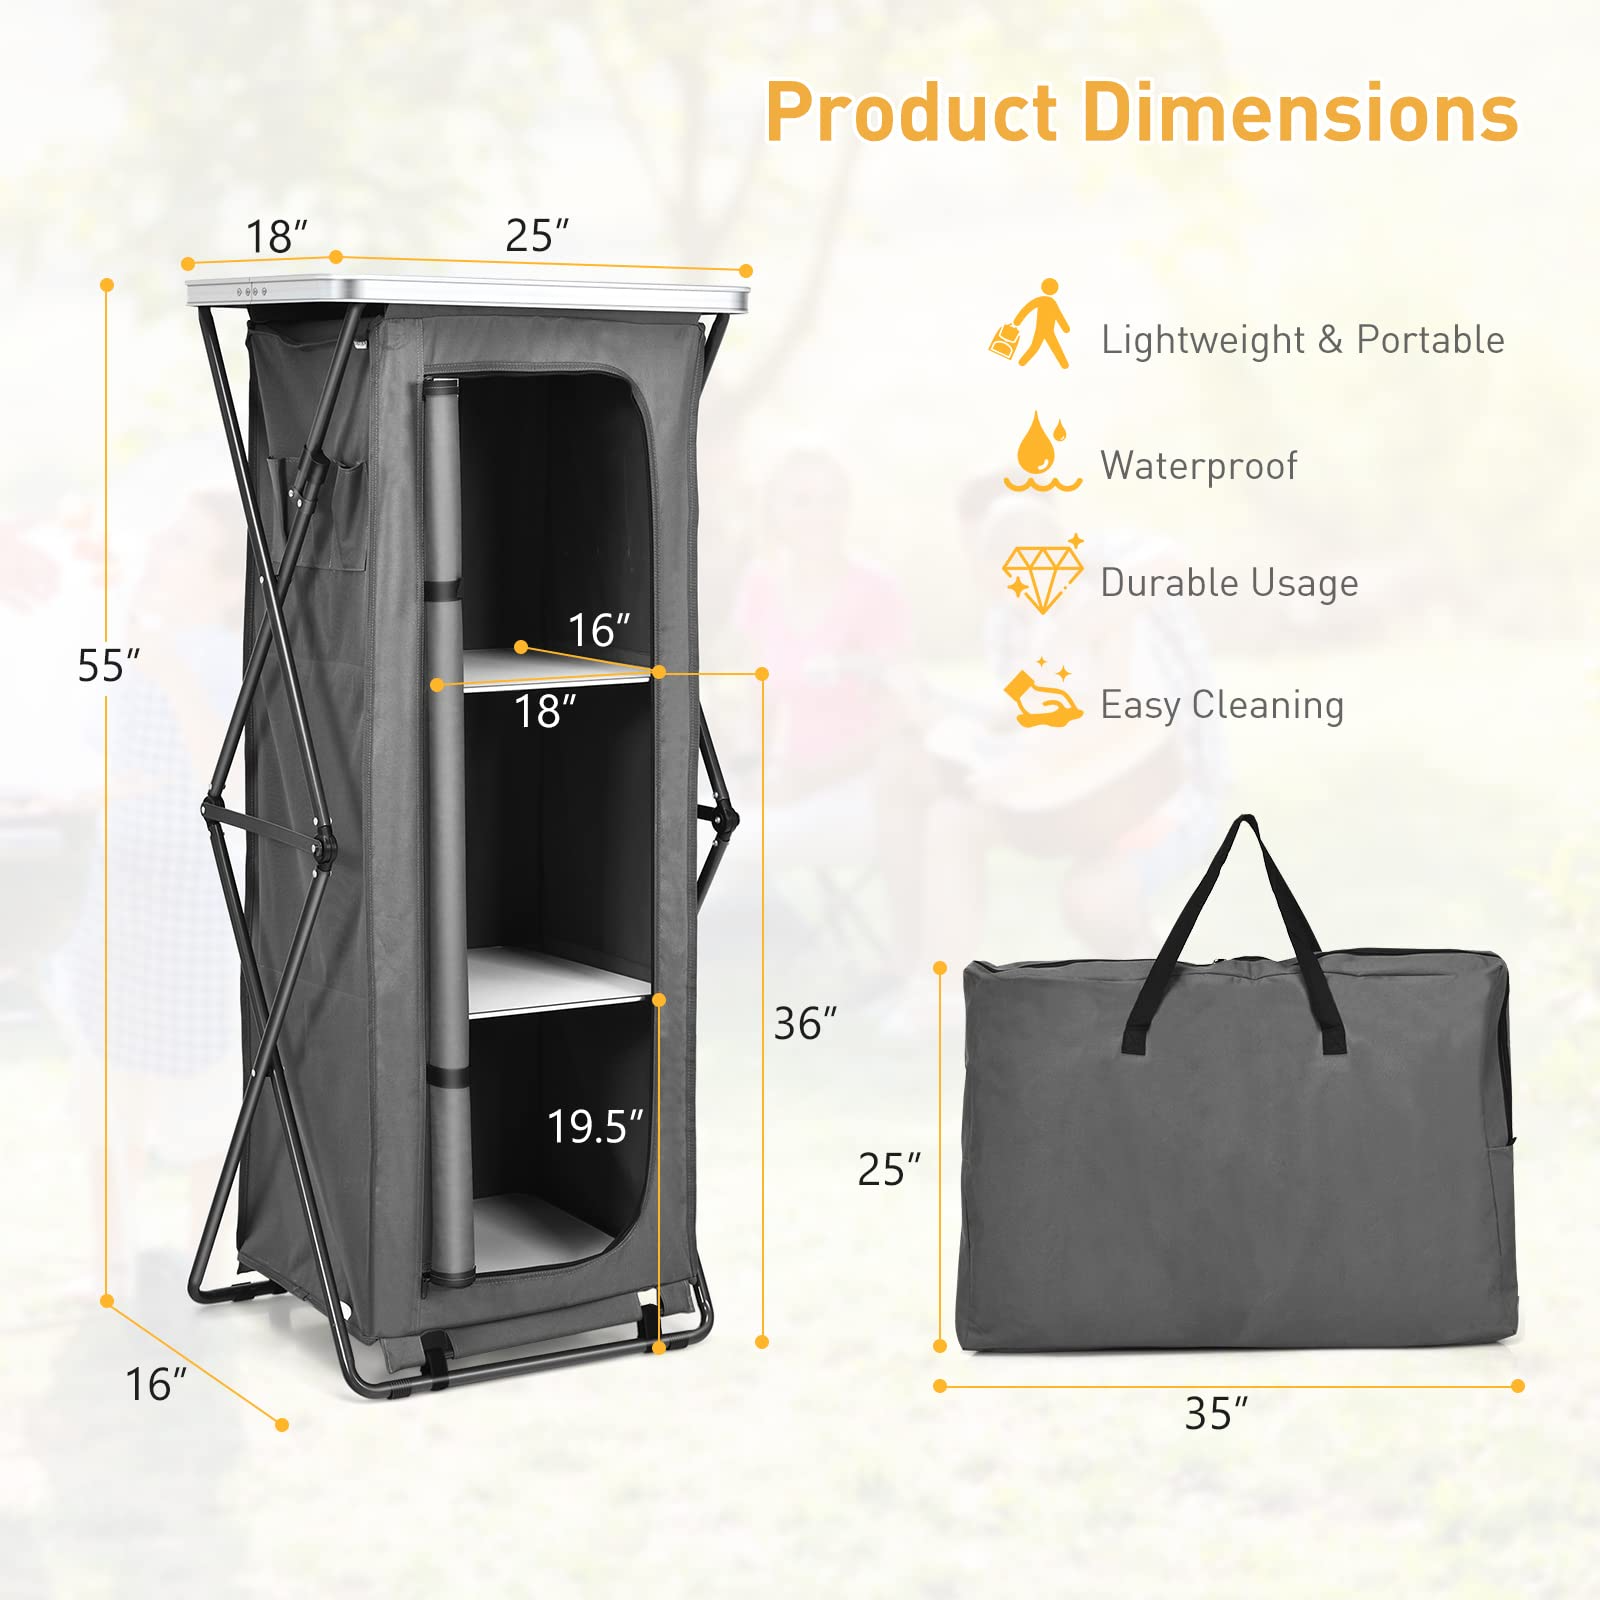 Goplus Folding Camping Storage Cabinet, Pop Up Outdoor Camping Kitchen Station with Large 3-Tier Storage Organizer